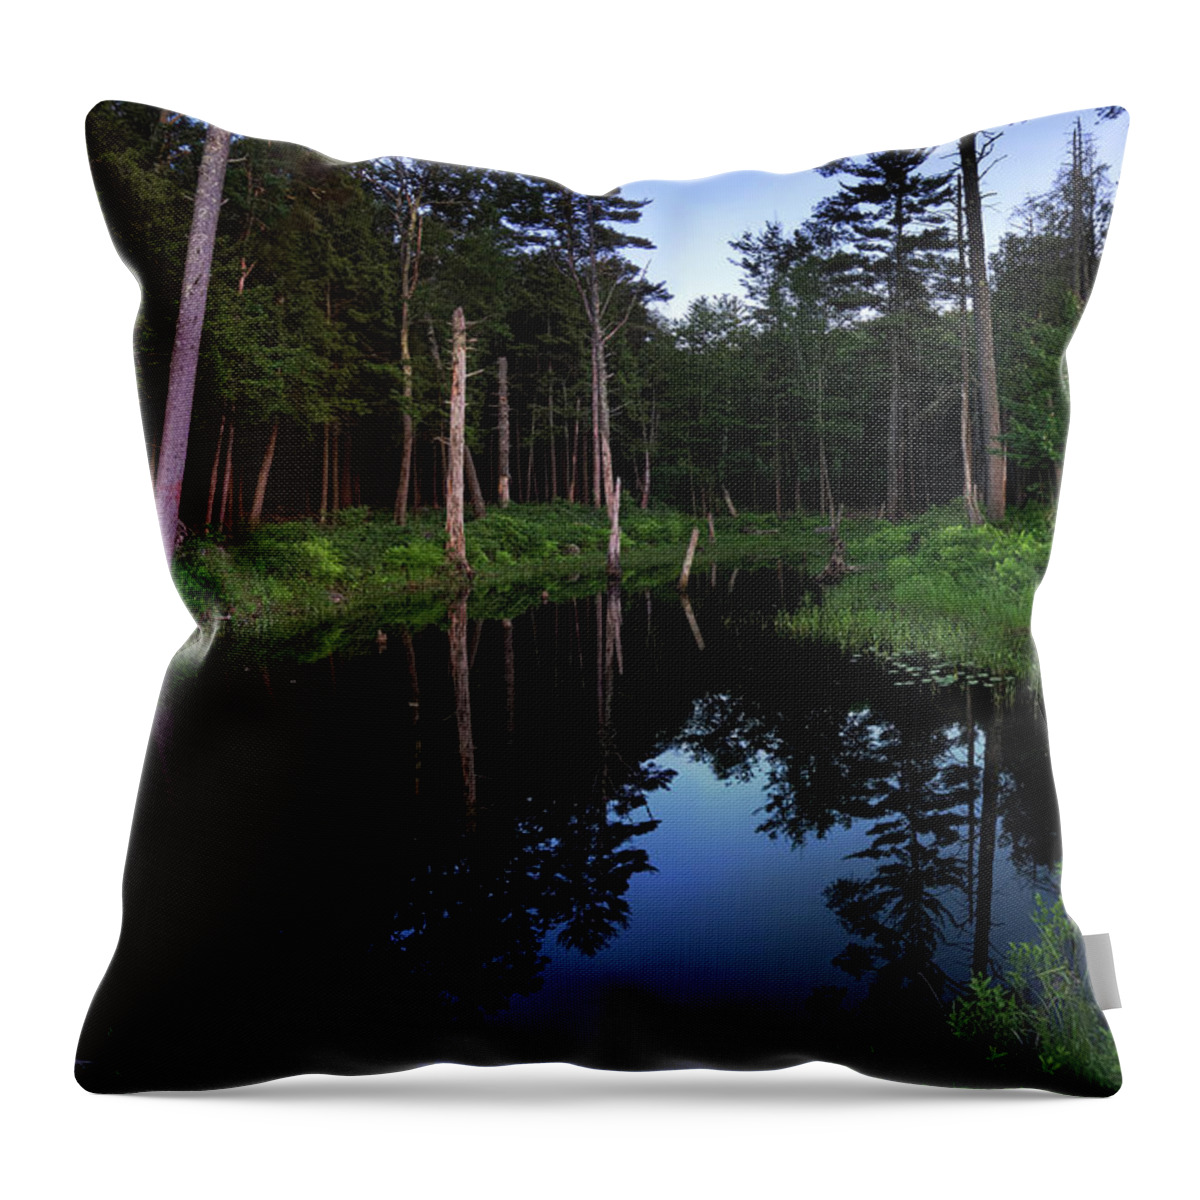 Twilight Throw Pillow featuring the photograph Twilight Pool by Jerry LoFaro